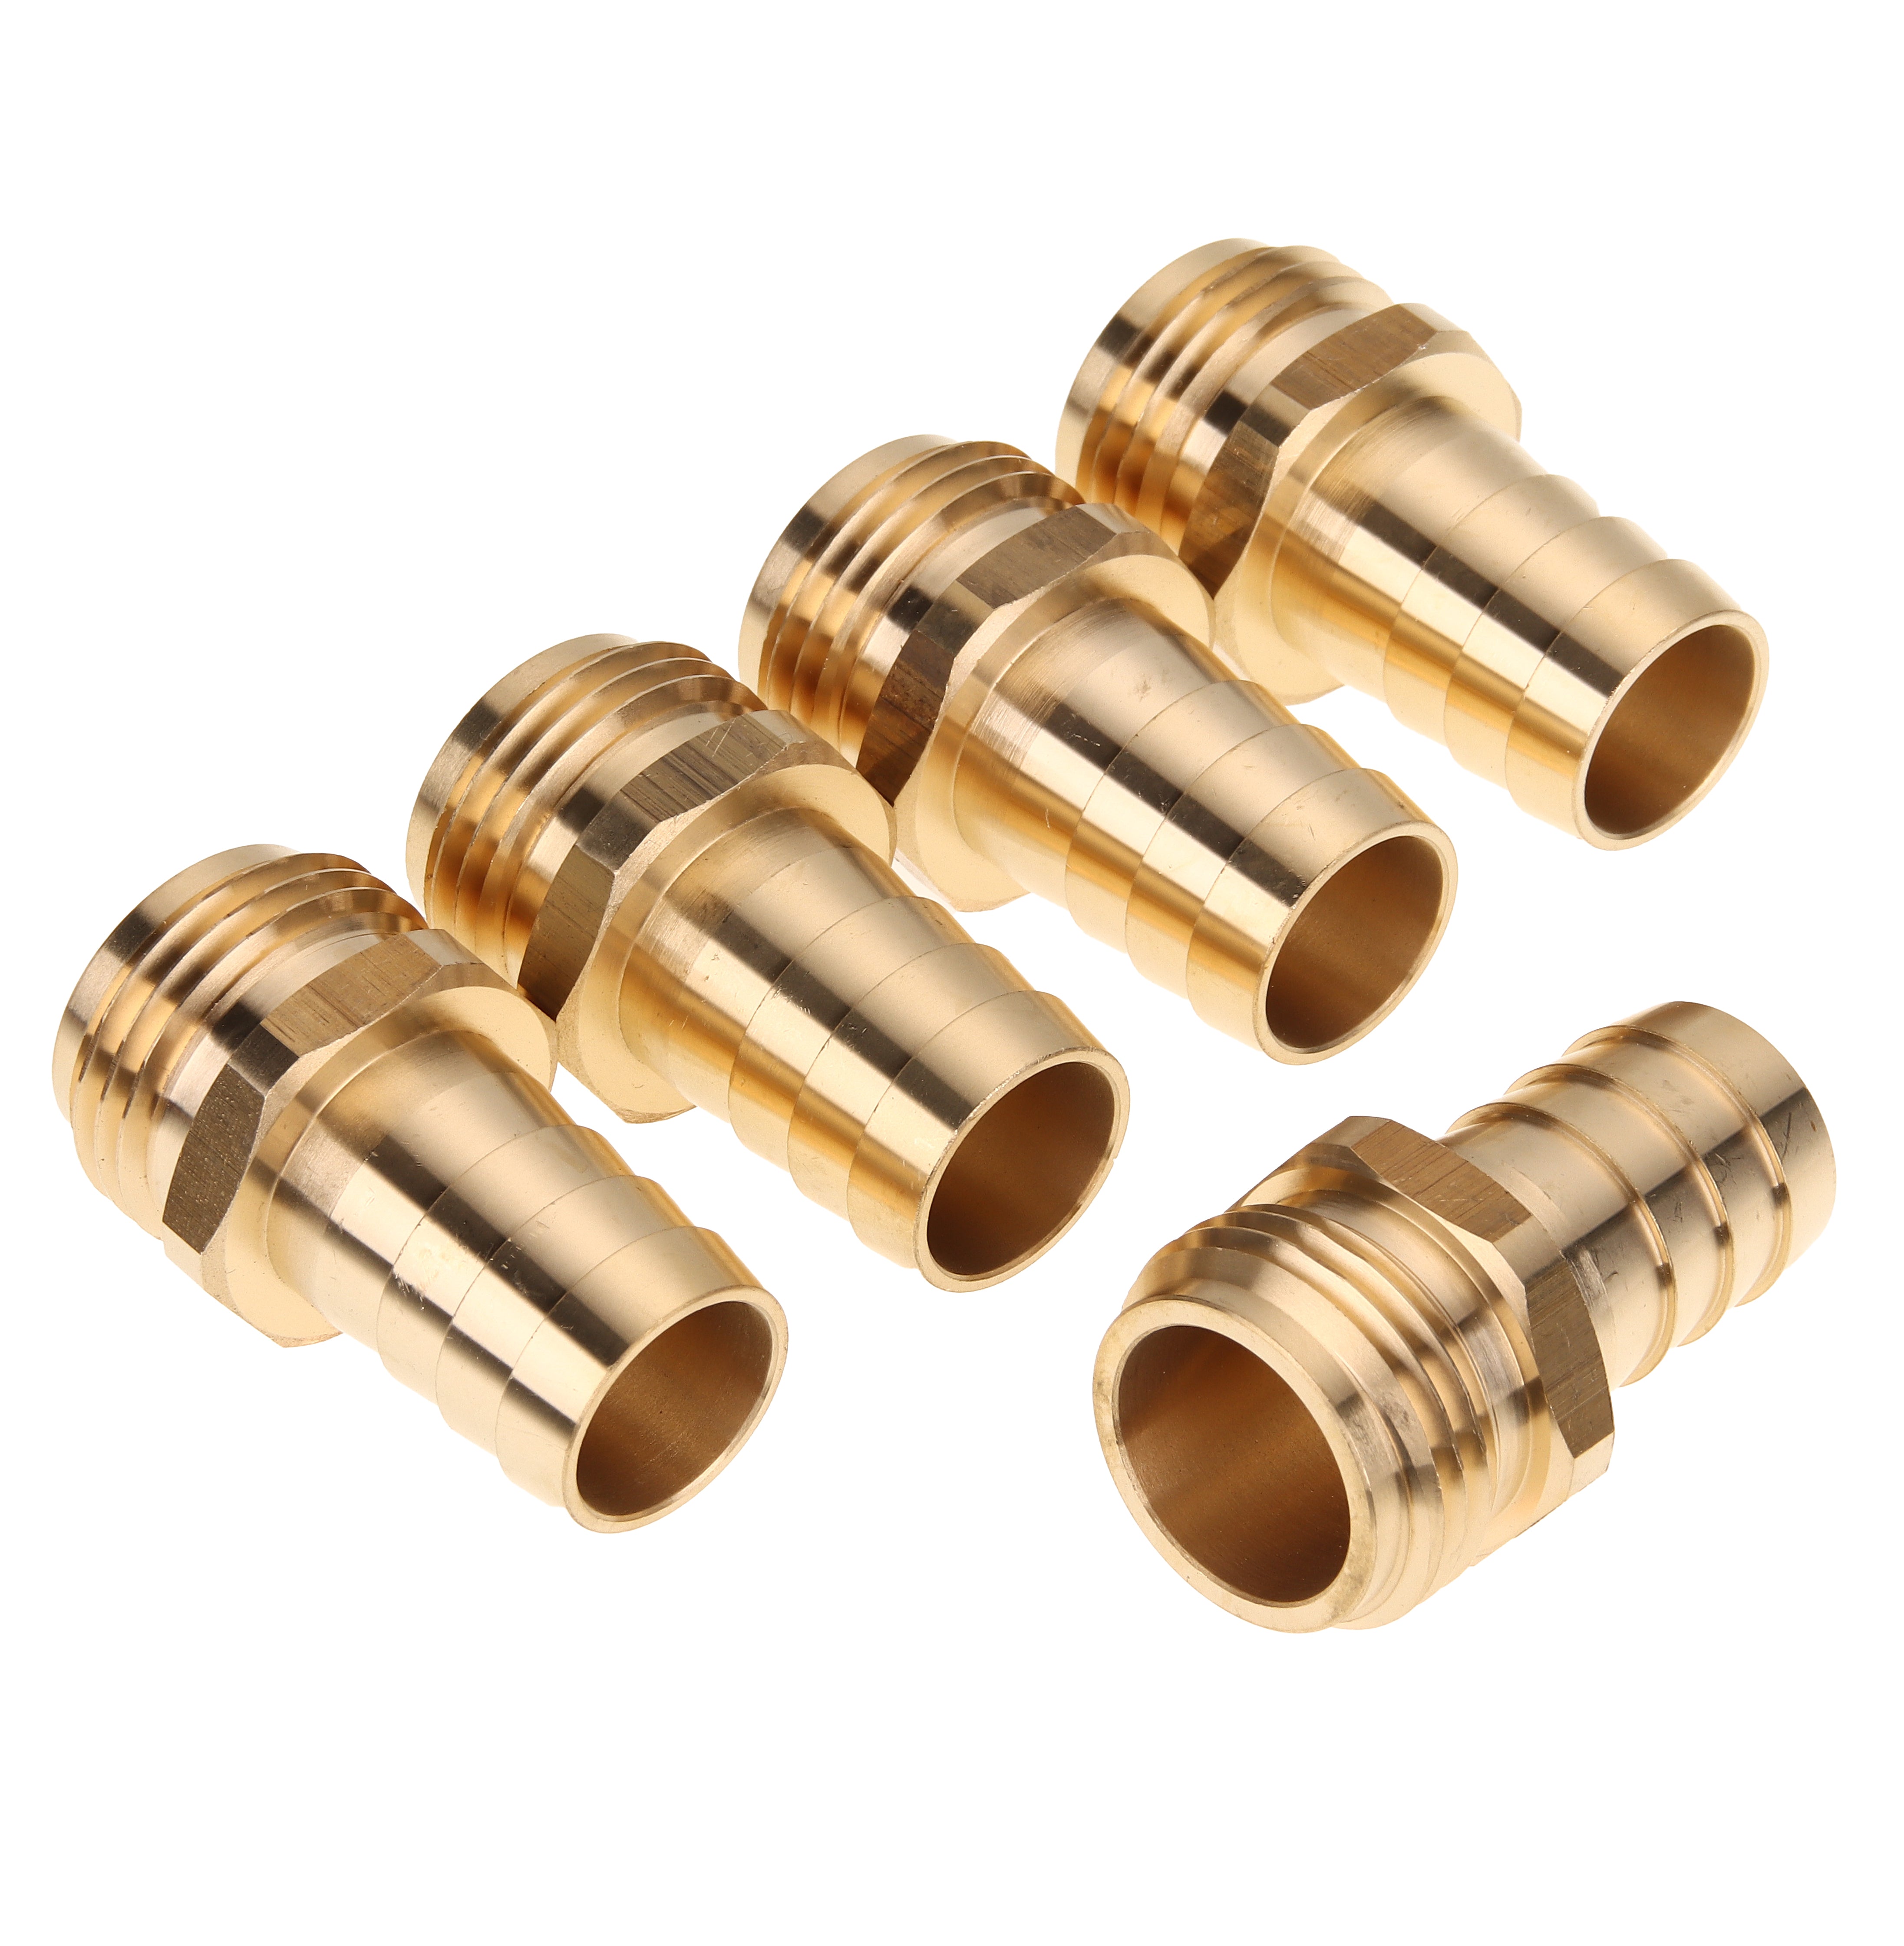 LTWFITTING Brass 3/4 Inch Barb x 3/4 Inch MHT Hose Repair/Connector,Garden Hose Fitting(Pack of 5)